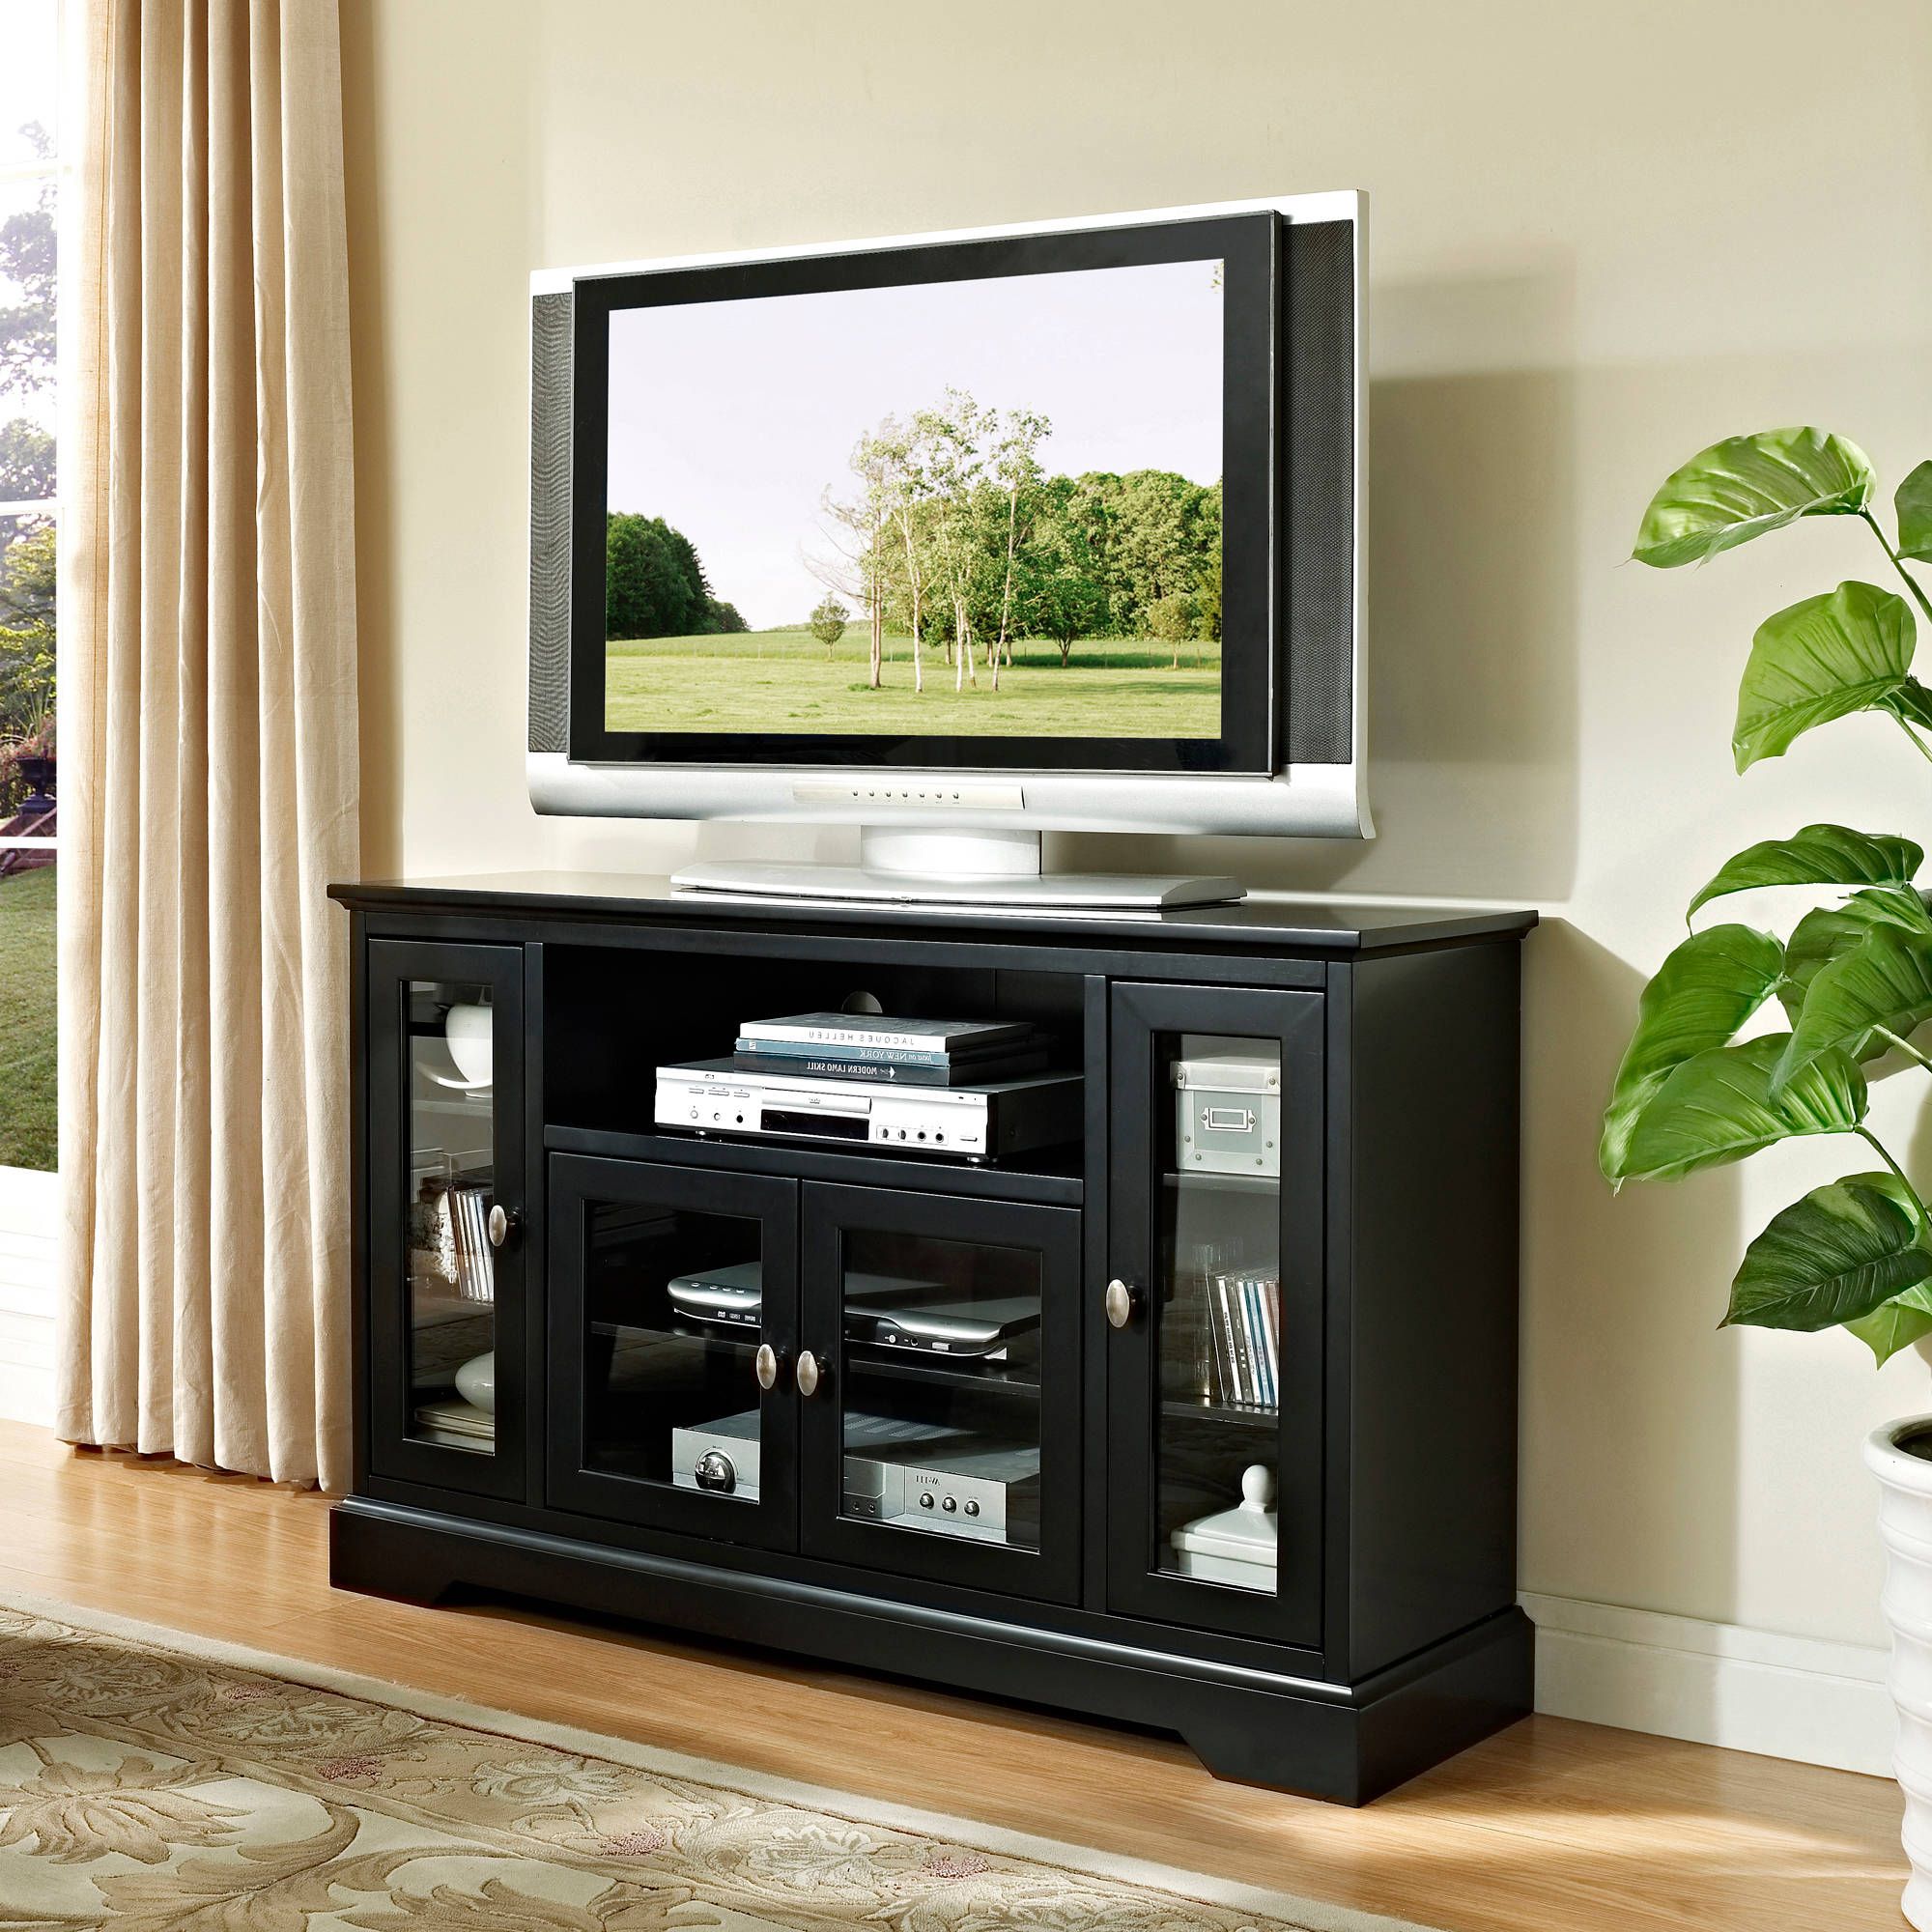 Walker Edison Highboy Style Tv Stand For Tvs Up To 55 Inside Walker Edison Wood Tv Media Storage Stands In Black (View 14 of 20)